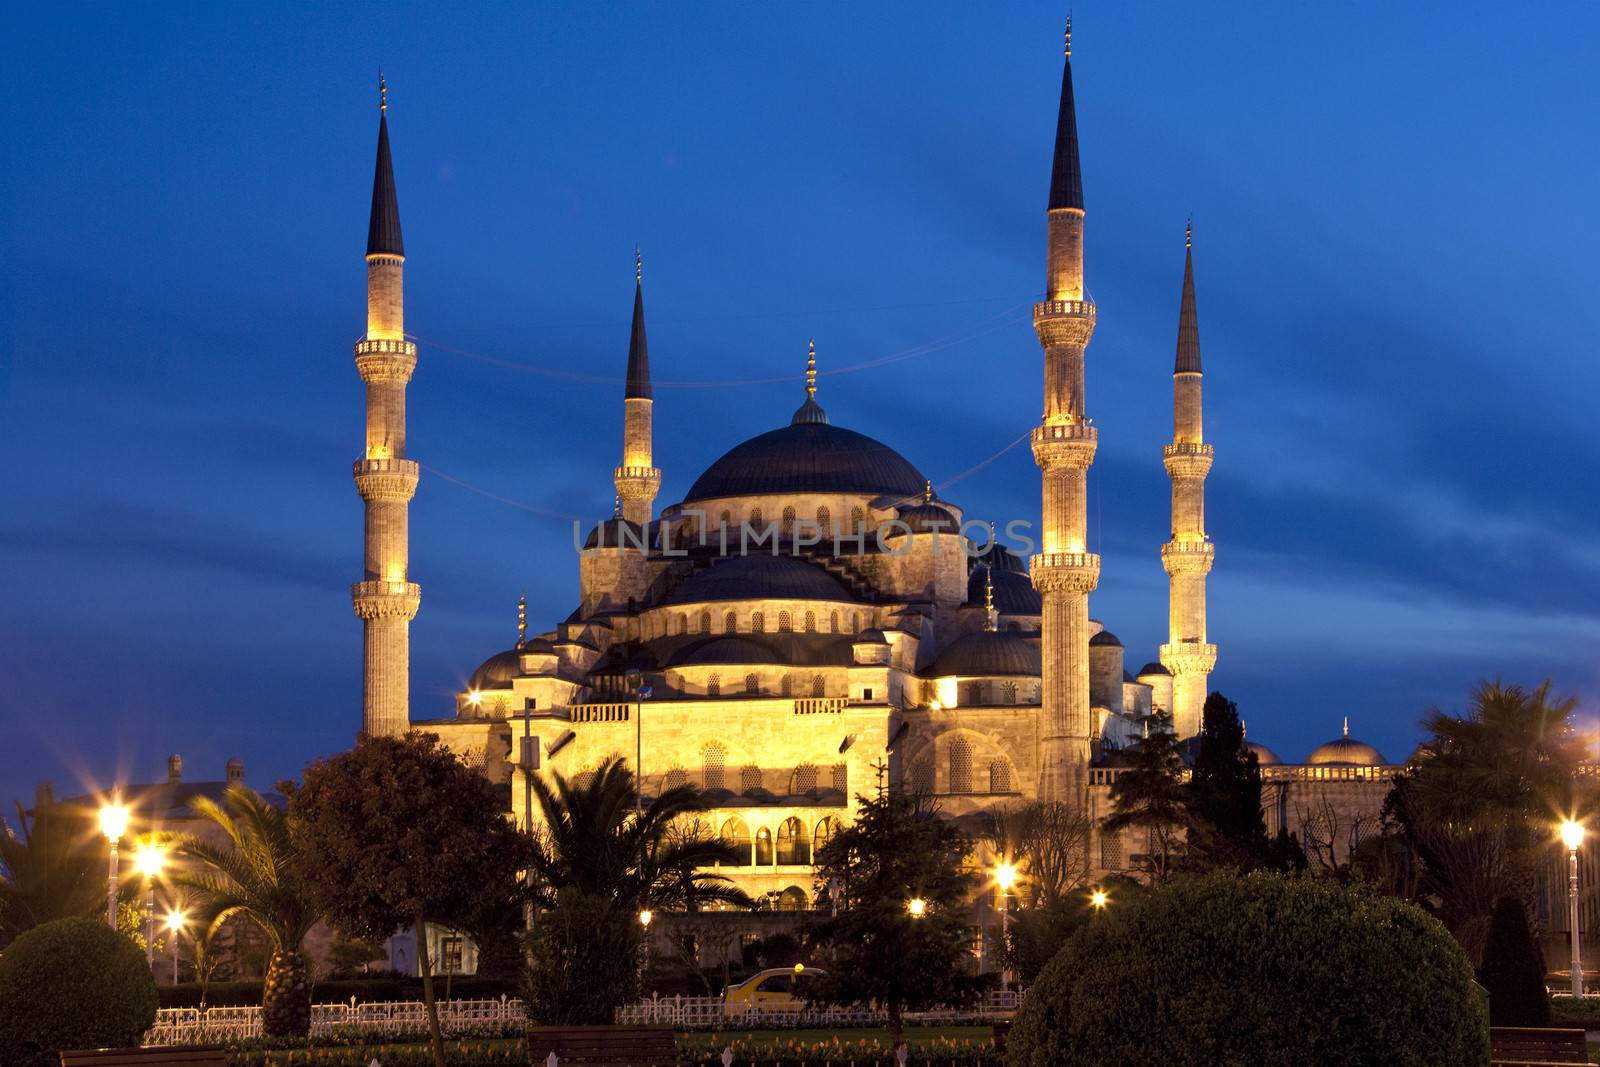 The Blue Mosque (Sultan Ahmet Camii Mosque) in the Sultanahmet area of Istanbul in Turkey. Built between 1609 and 1616 by Mehmet Aga the imperial architect.